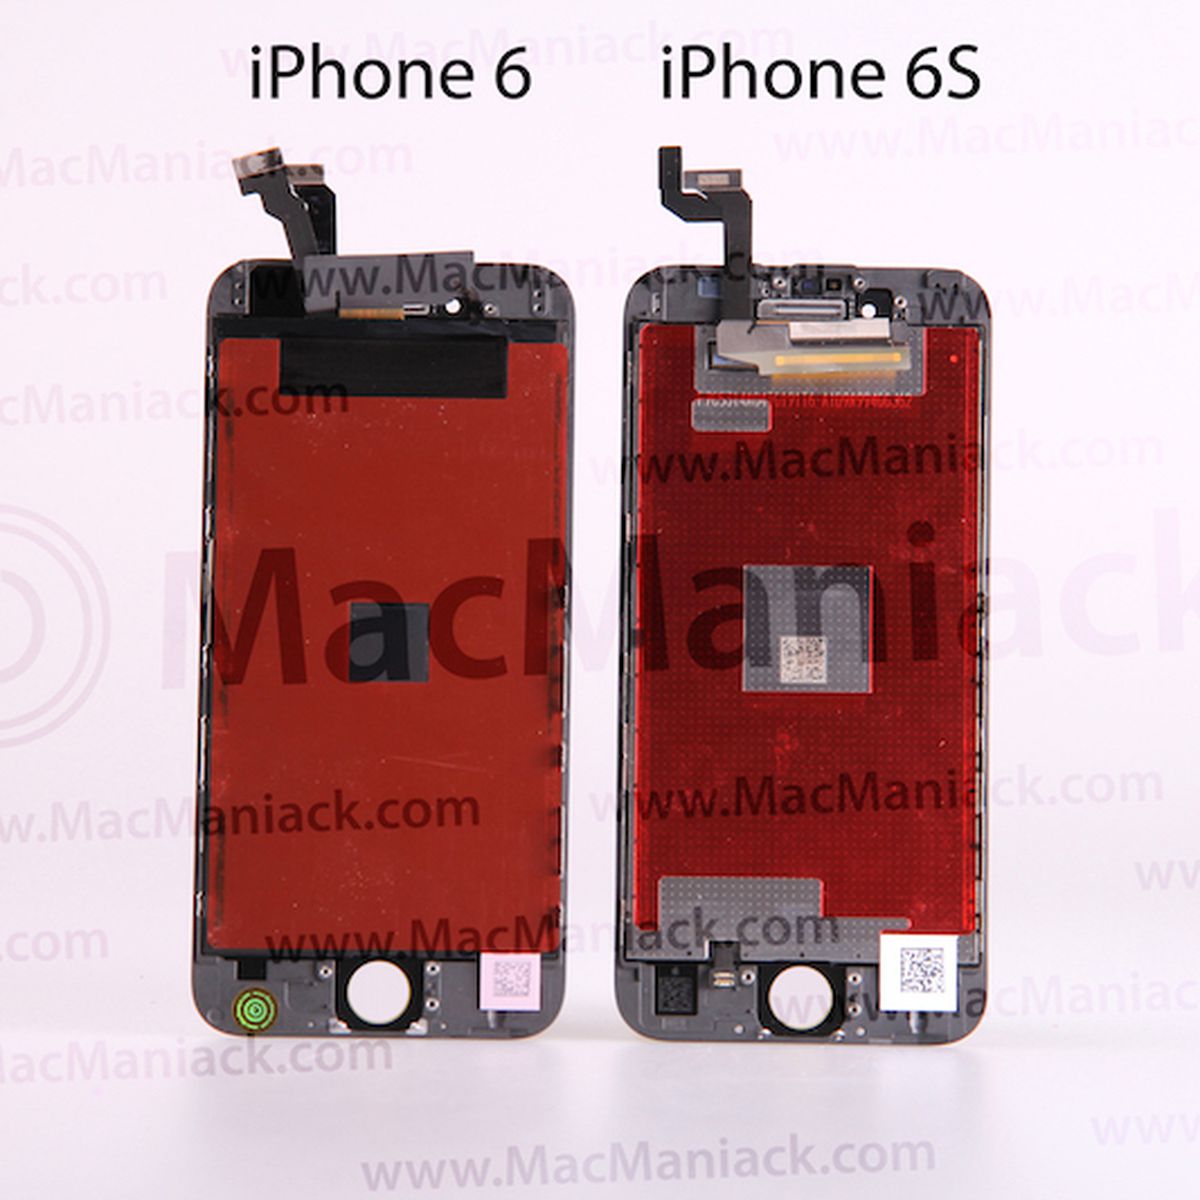 iPhone 6s' and iPhone 6 Displays Compared in New Video - MacRumors